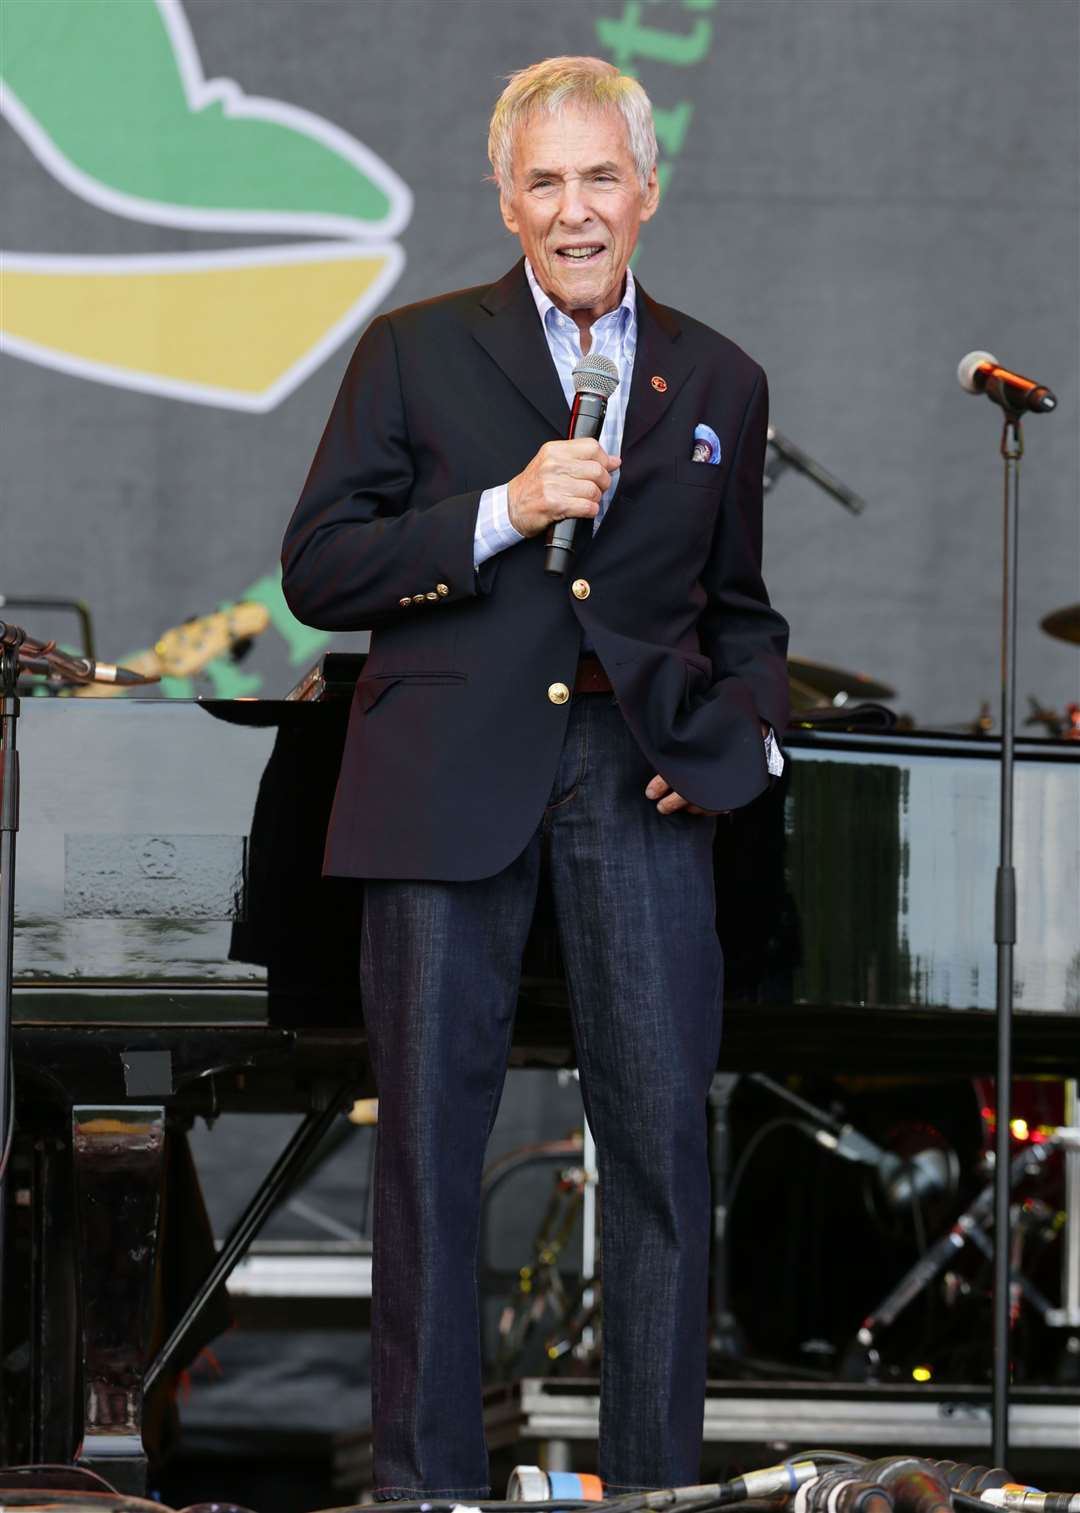 Burt Bacharach performing on the Pyramid stage at the Glastonbury Festival at Worthy Farm in Somerset (Yui Mok/PA)